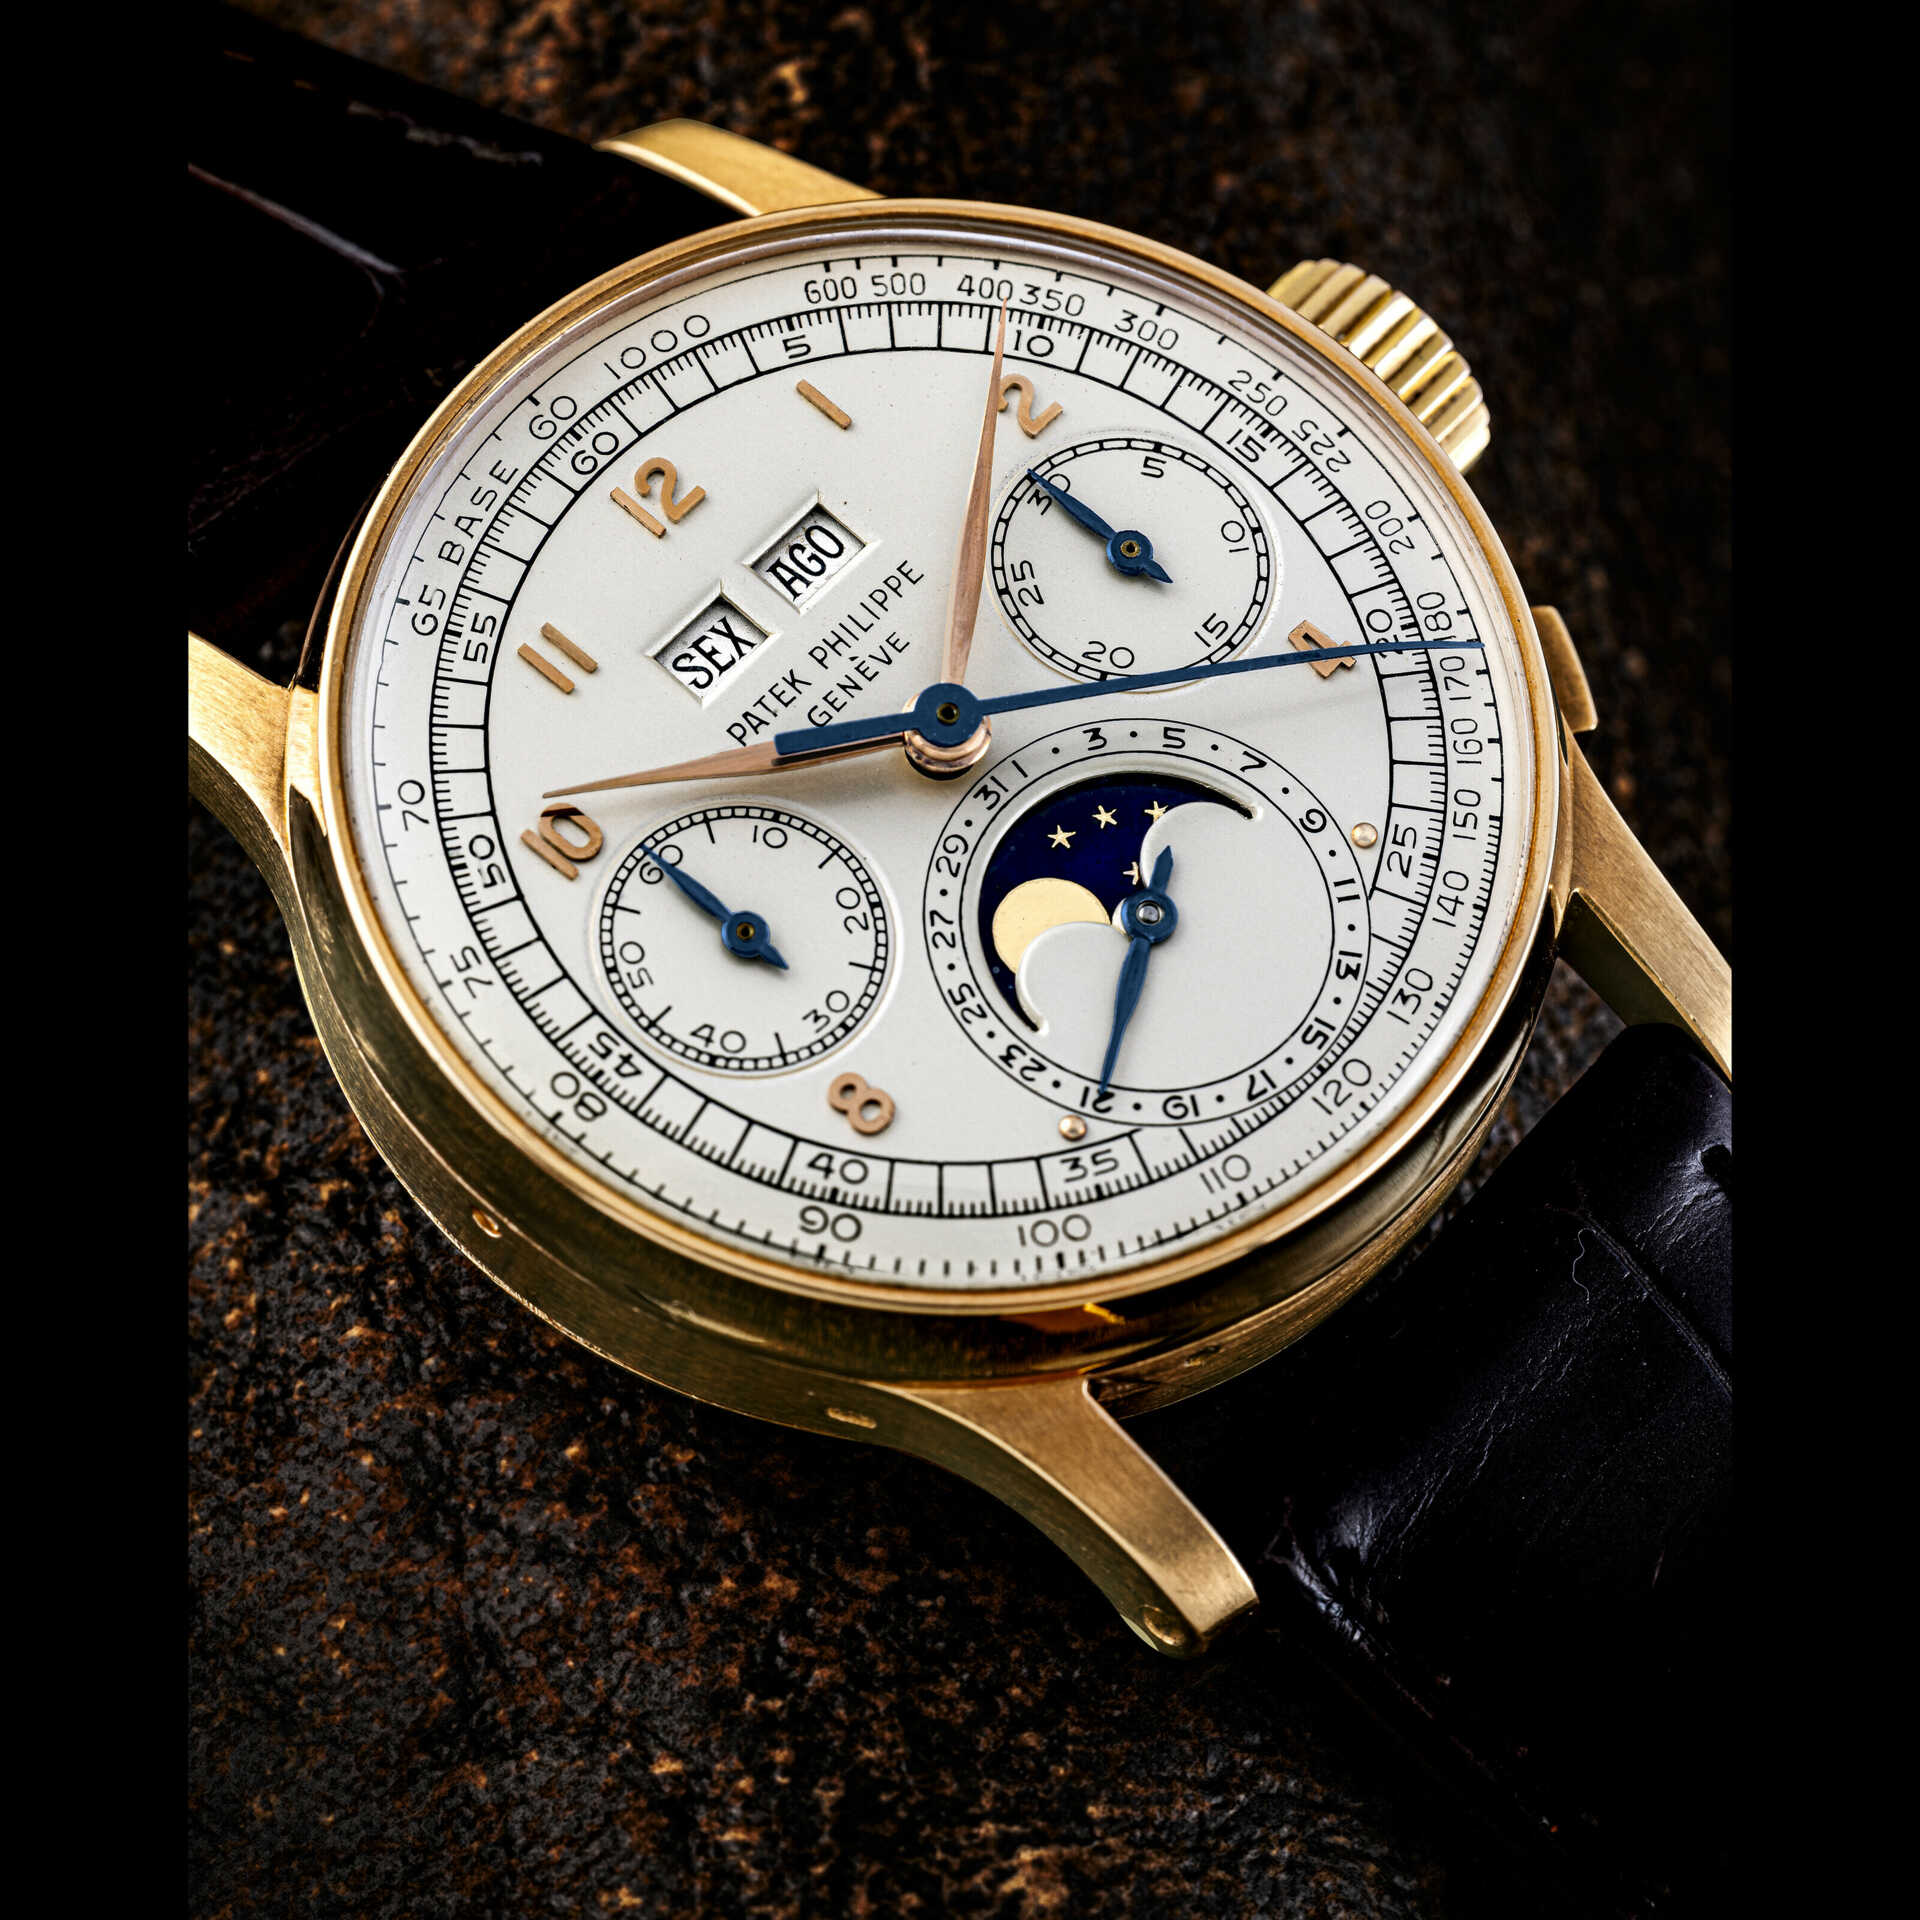 PATEK PHILIPPE. AN IMPORTANT, EXTREMELY RARE AND INCREDIBLY WELL-PRESERVED 18K PINK GOLD PERPETUAL CALENDAR CHRONOGRAPH WRISTWATCH WITH MOON PHASES AND PORTUGUESE CALENDAR